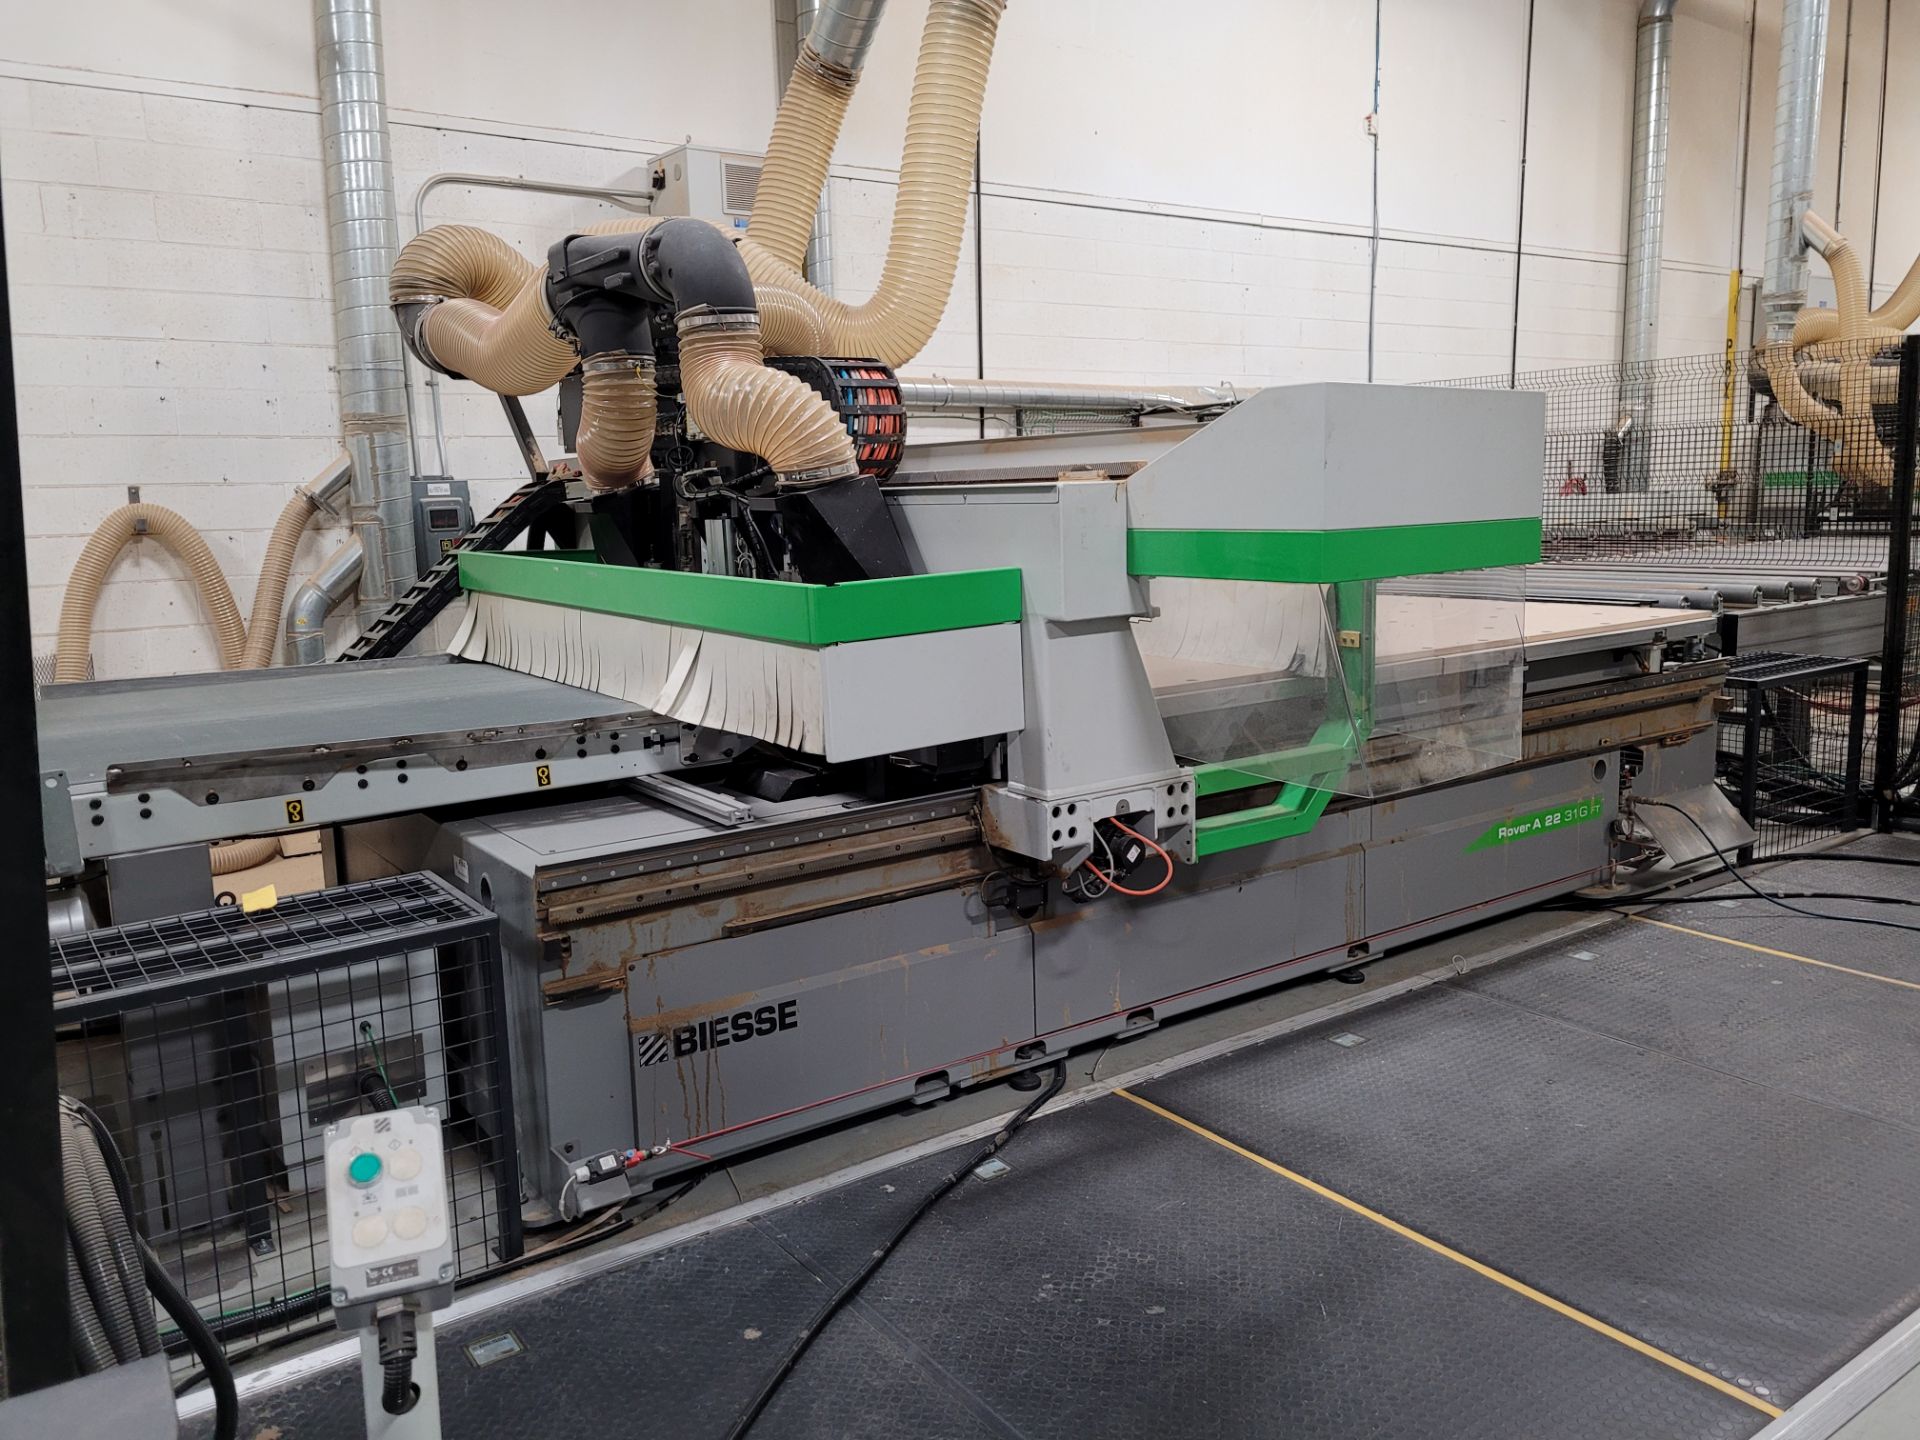 2011 BIESSE Flat Table CNC Router mod. Rover-A-22-31-GFT, 2200mm x 3100mm, ser. 45941 w/ CNC Control - Image 2 of 8